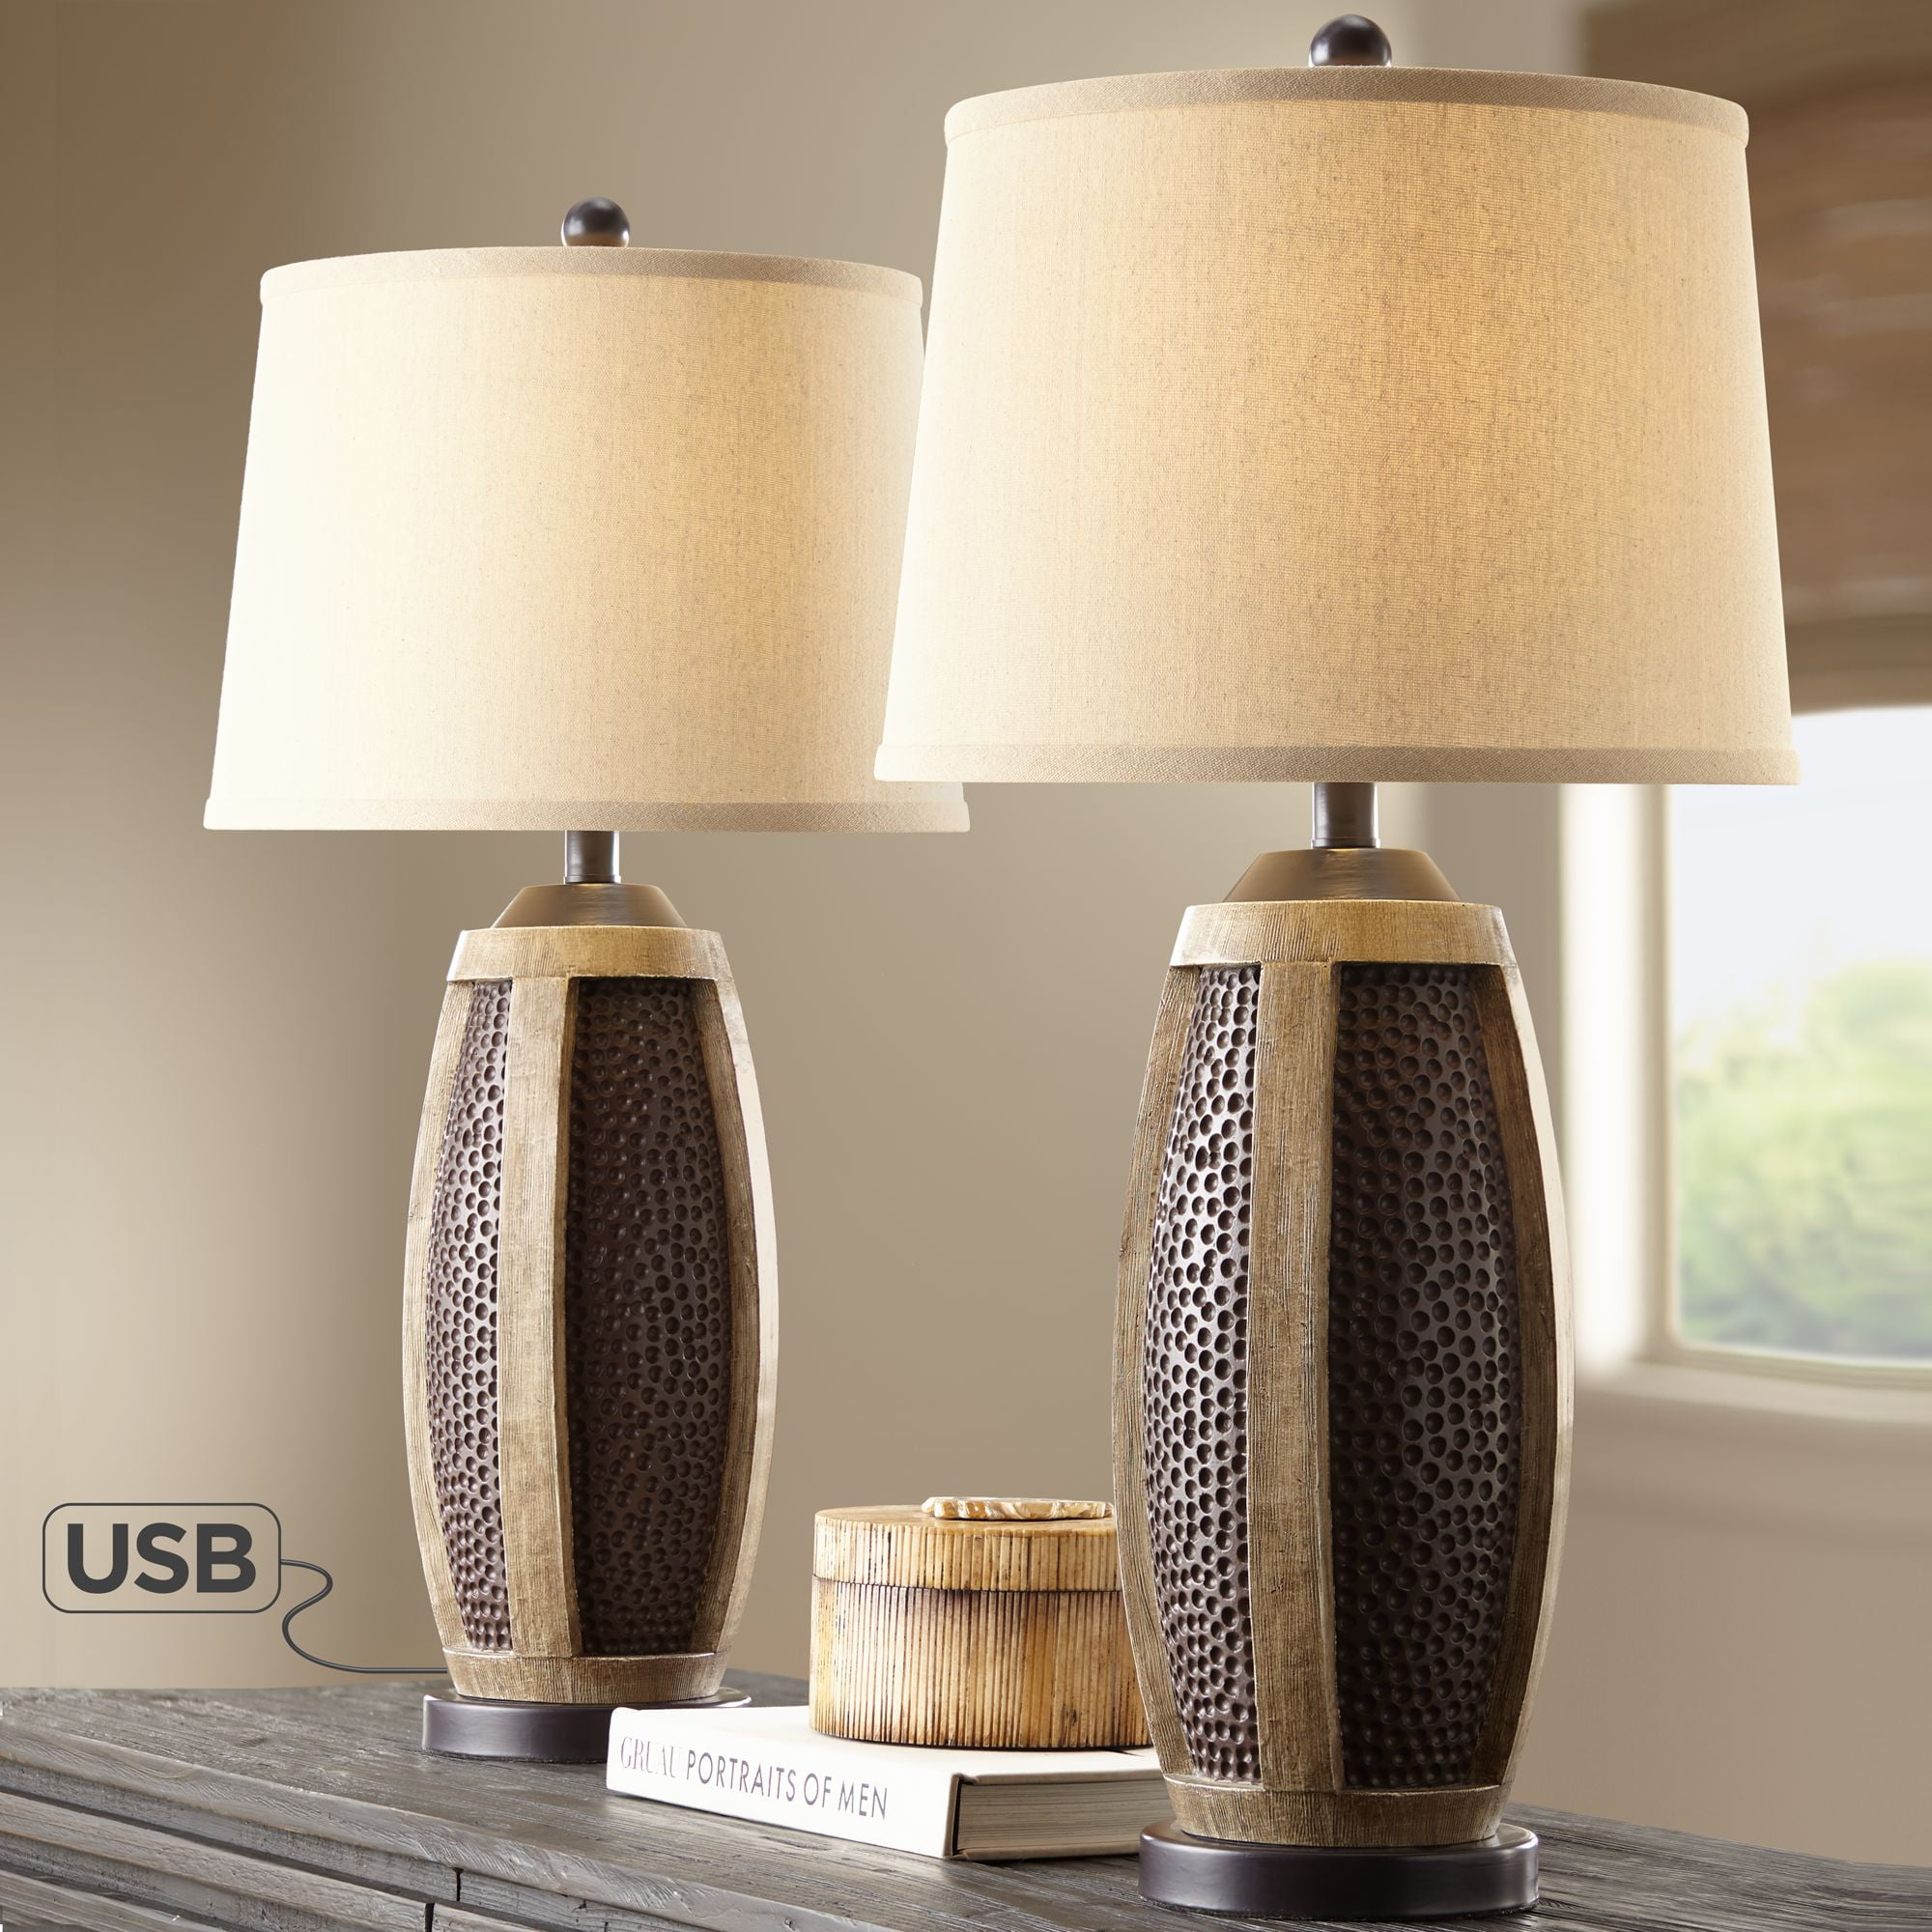 John Timberland Rustic Farmhouse Table Lamps  Set of 2 with USB Charging 